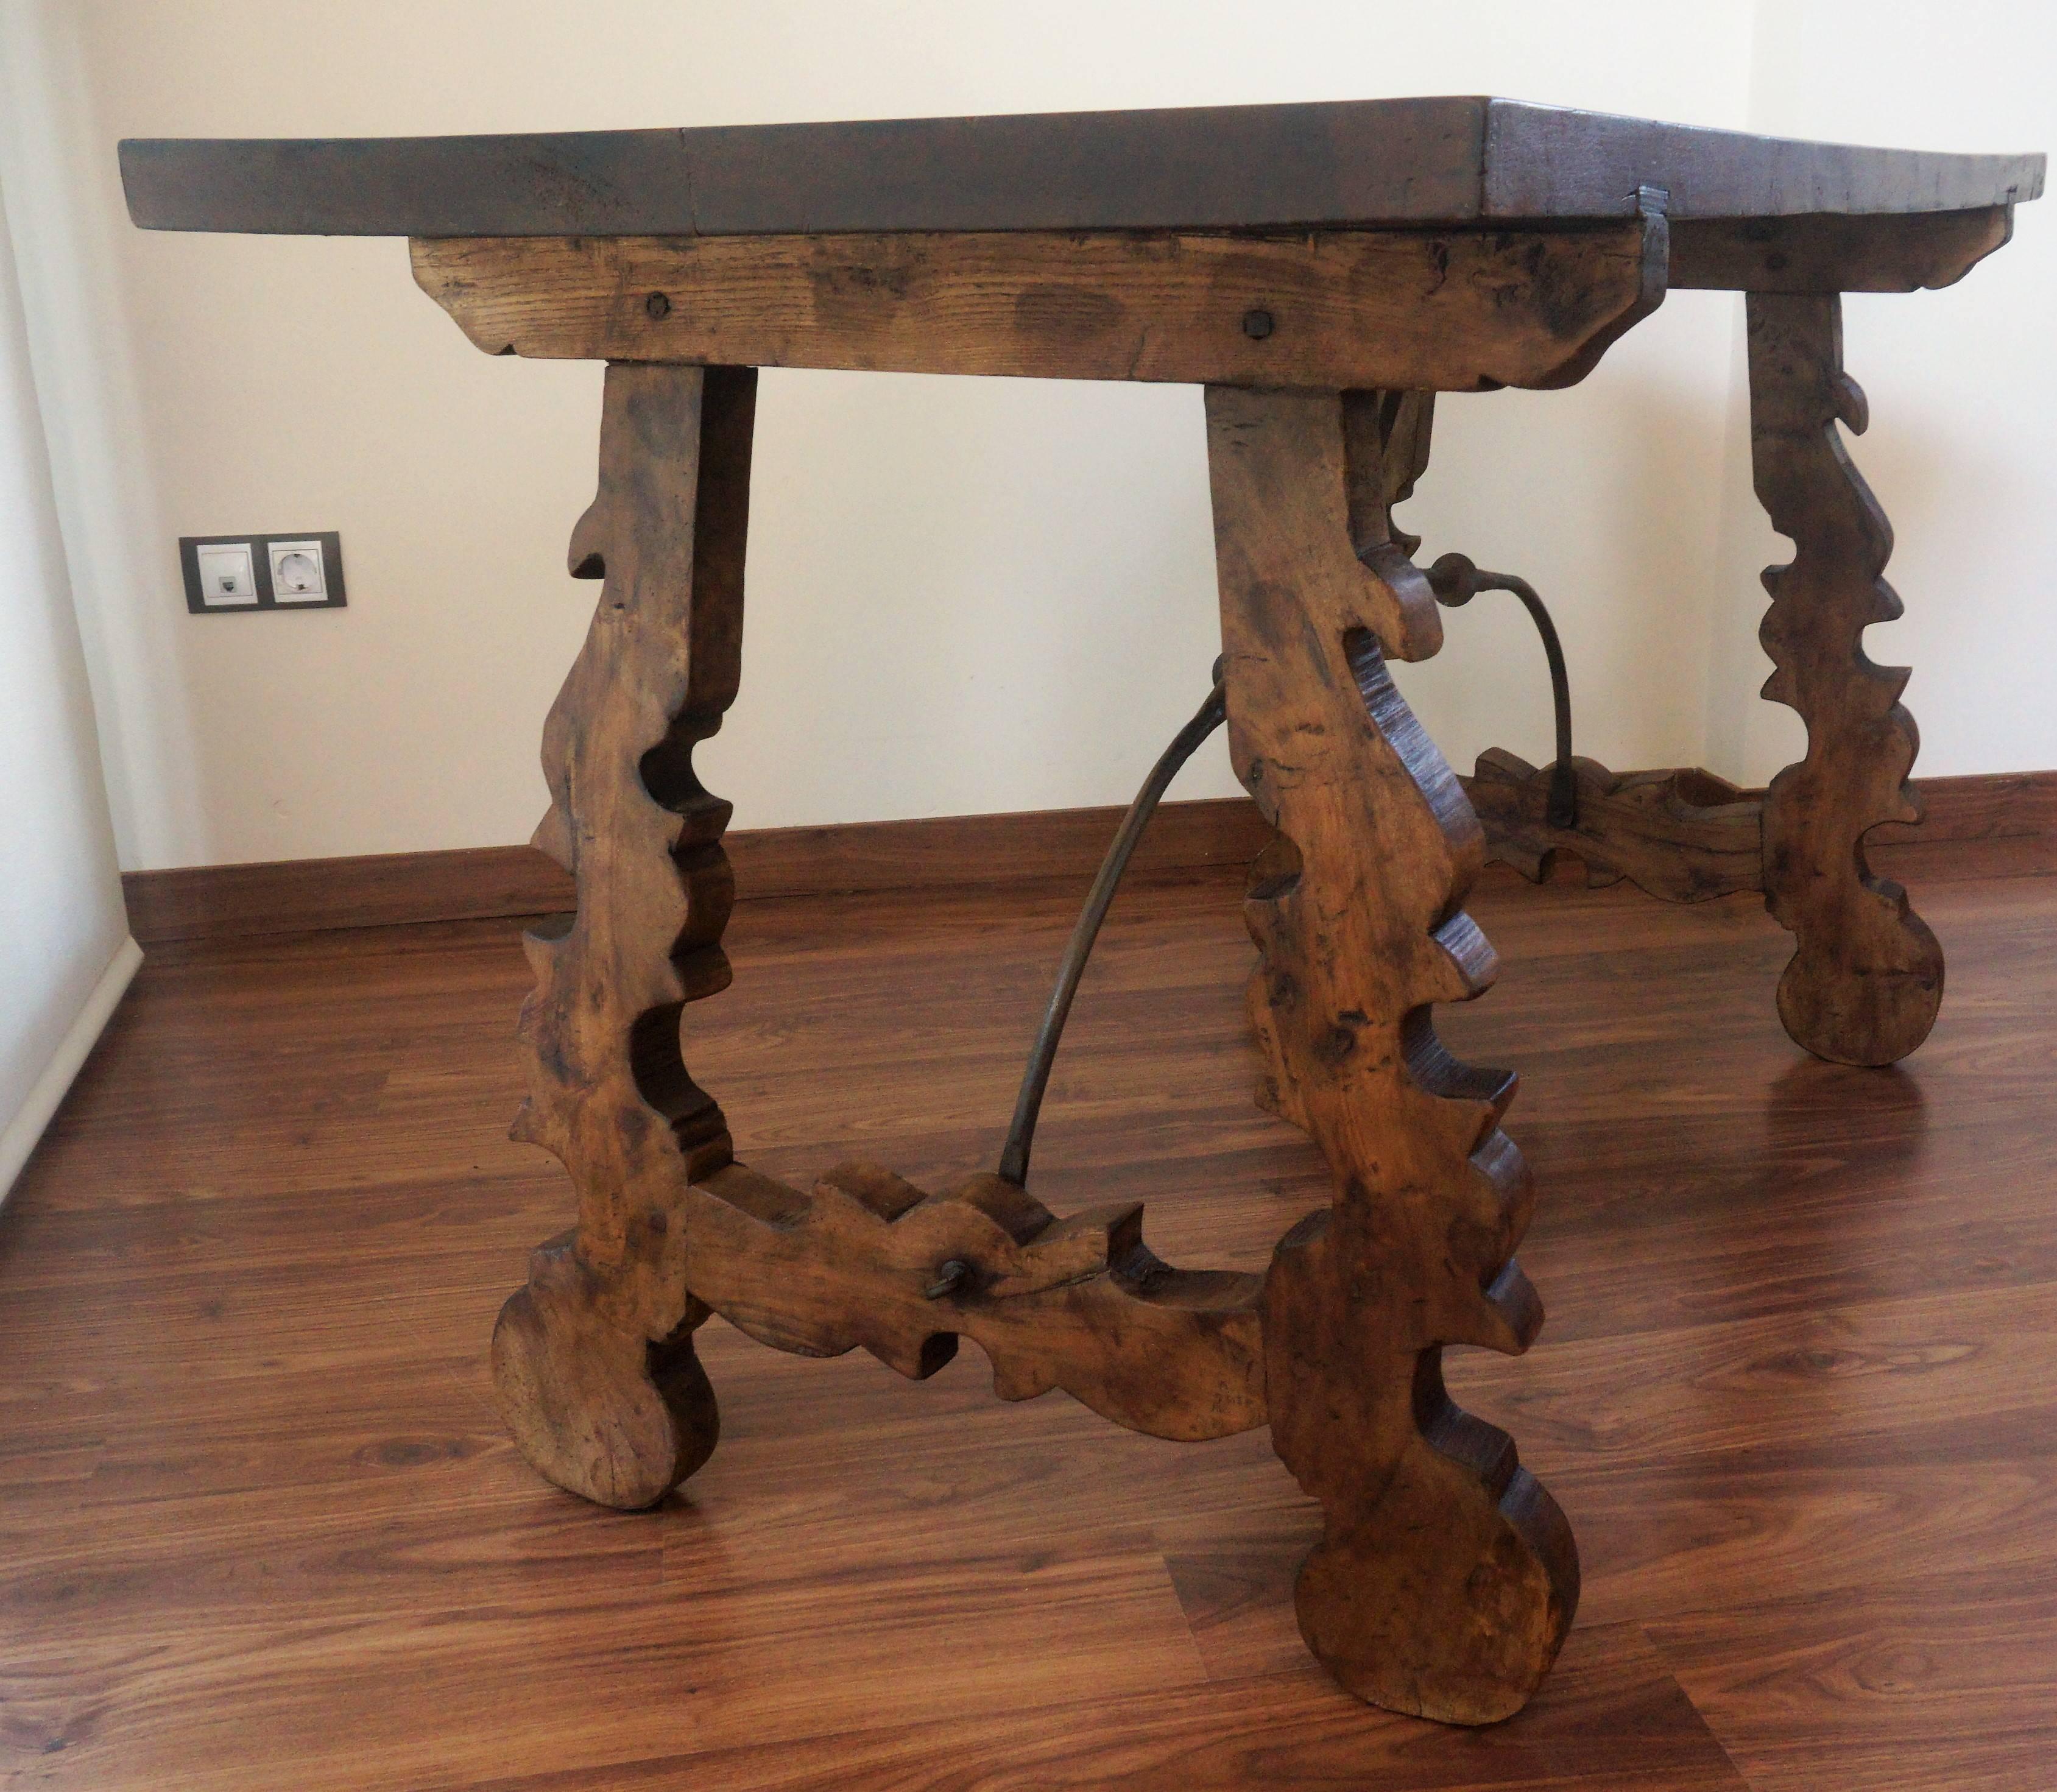 18th century Catalonian dining table with Baroque style lyre legs

This Spanish 18th century table features a rectangular top over an exquisite trestle type base with lyre shaped legs raised on carved volutes. Big thickness of the plateau and